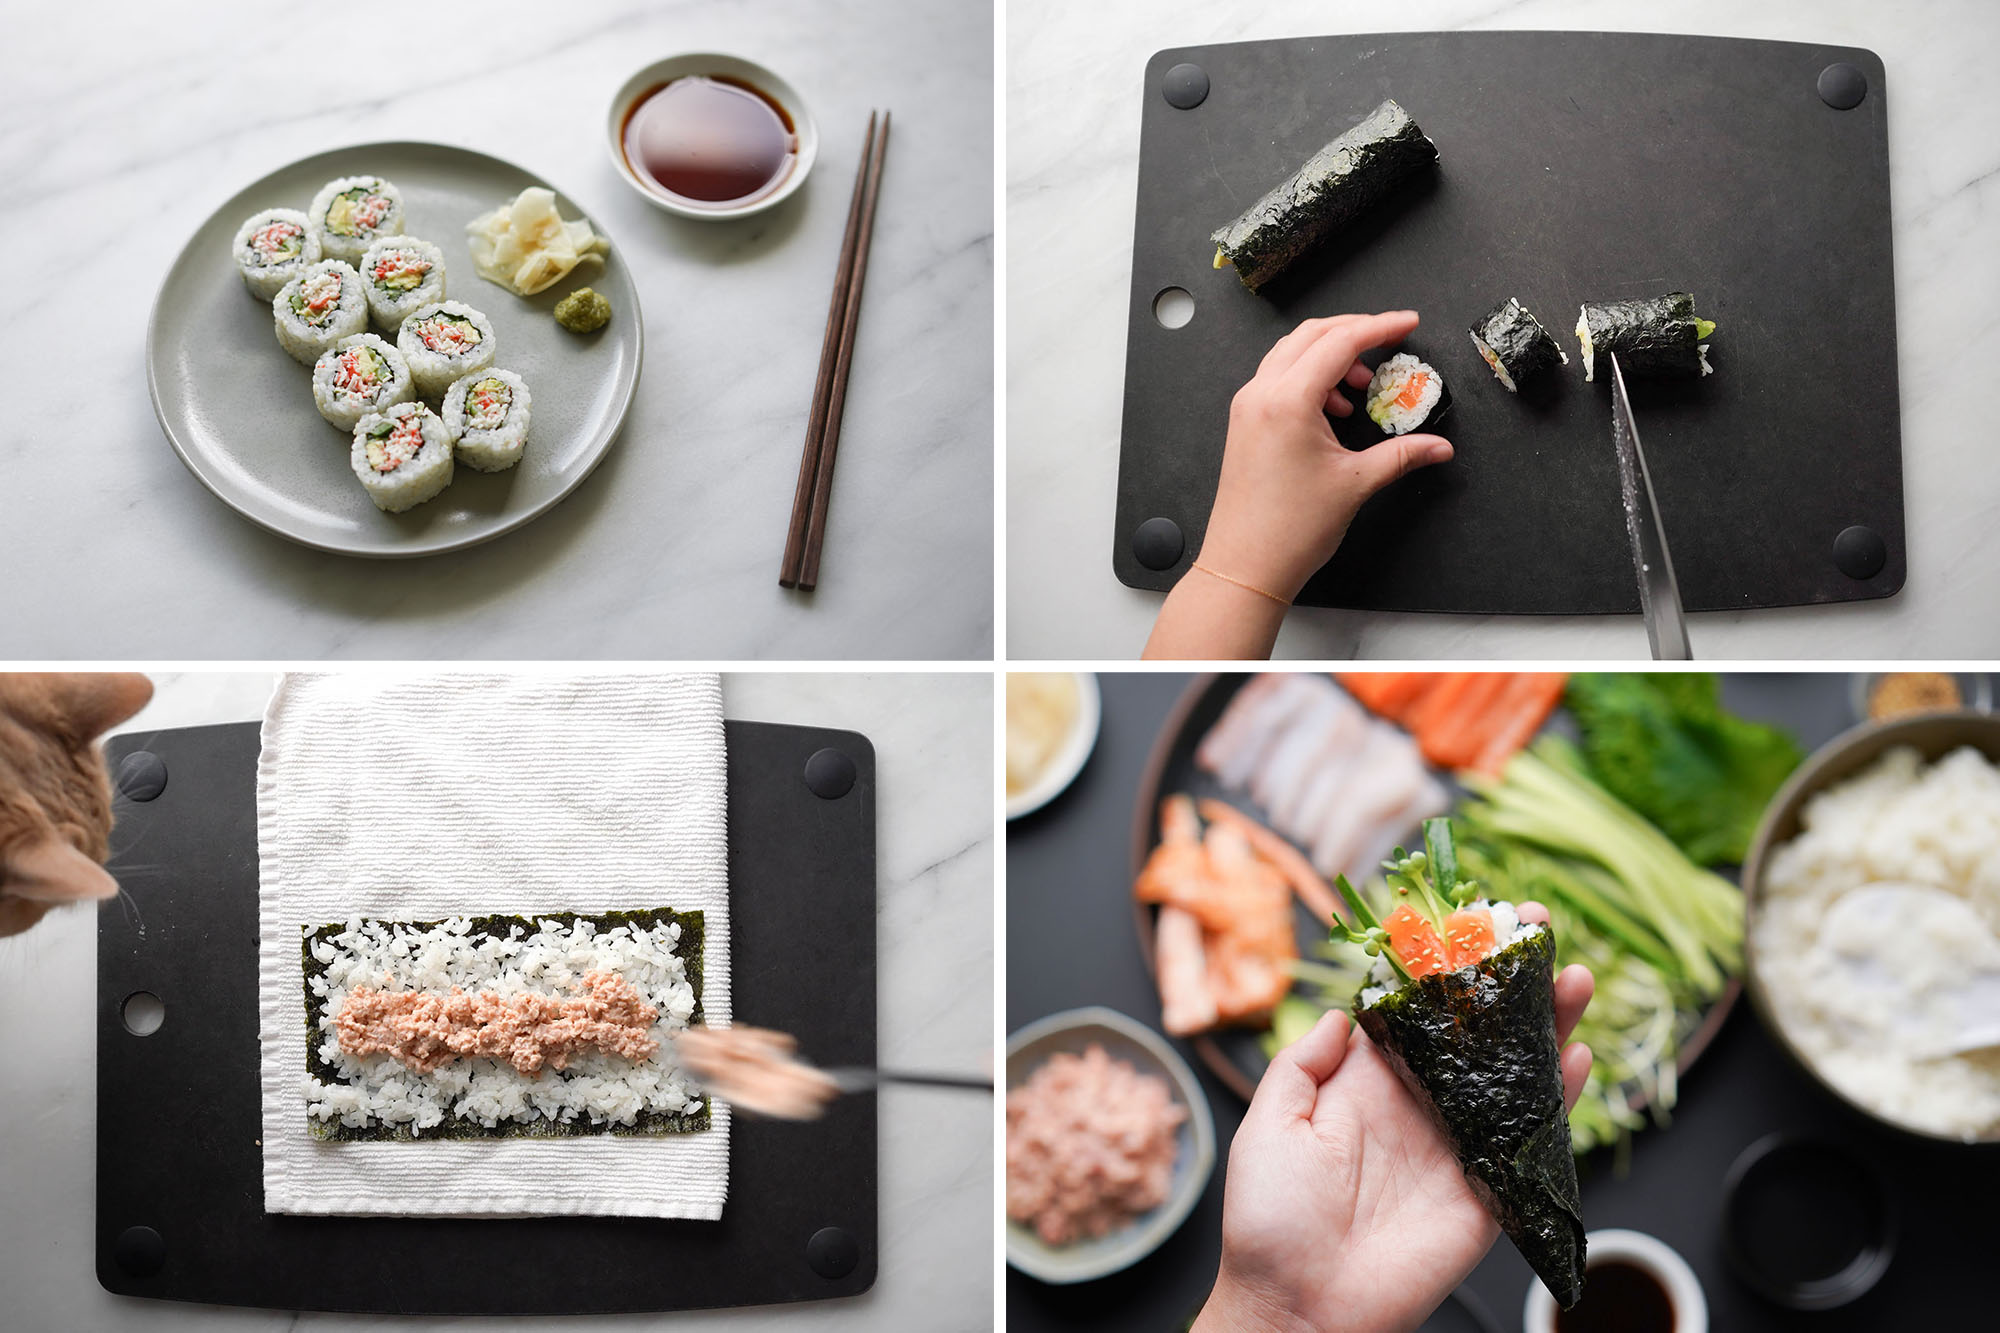 How to Roll Sushi (2 Easy Ways!) - Evolving Table